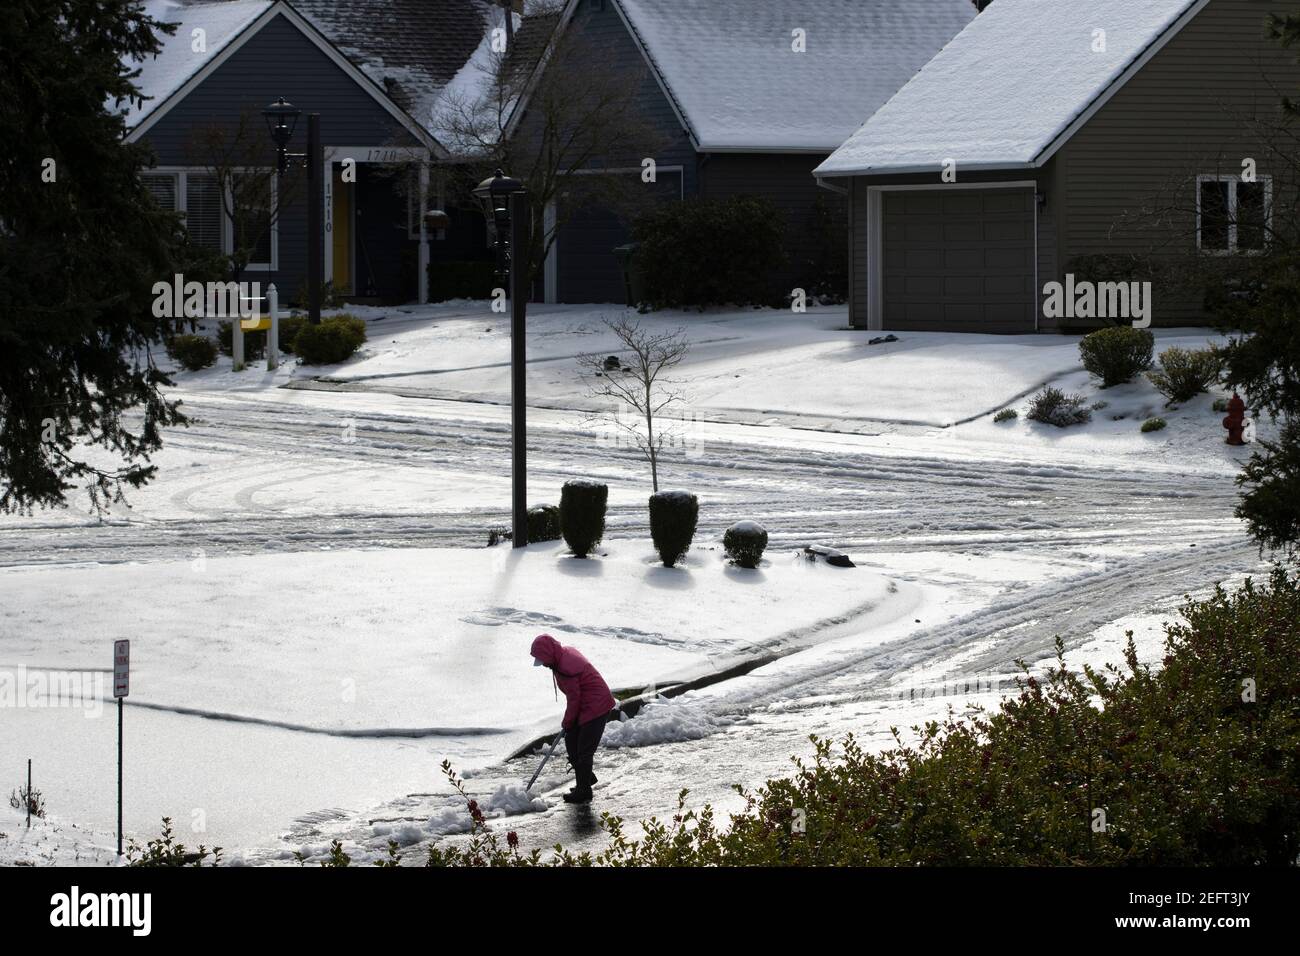 A woman shovels snow and ice on a neighborhood street in Lake Oswego, Oregon, on February 15, 2021, after snow and freezing rain. Stock Photo